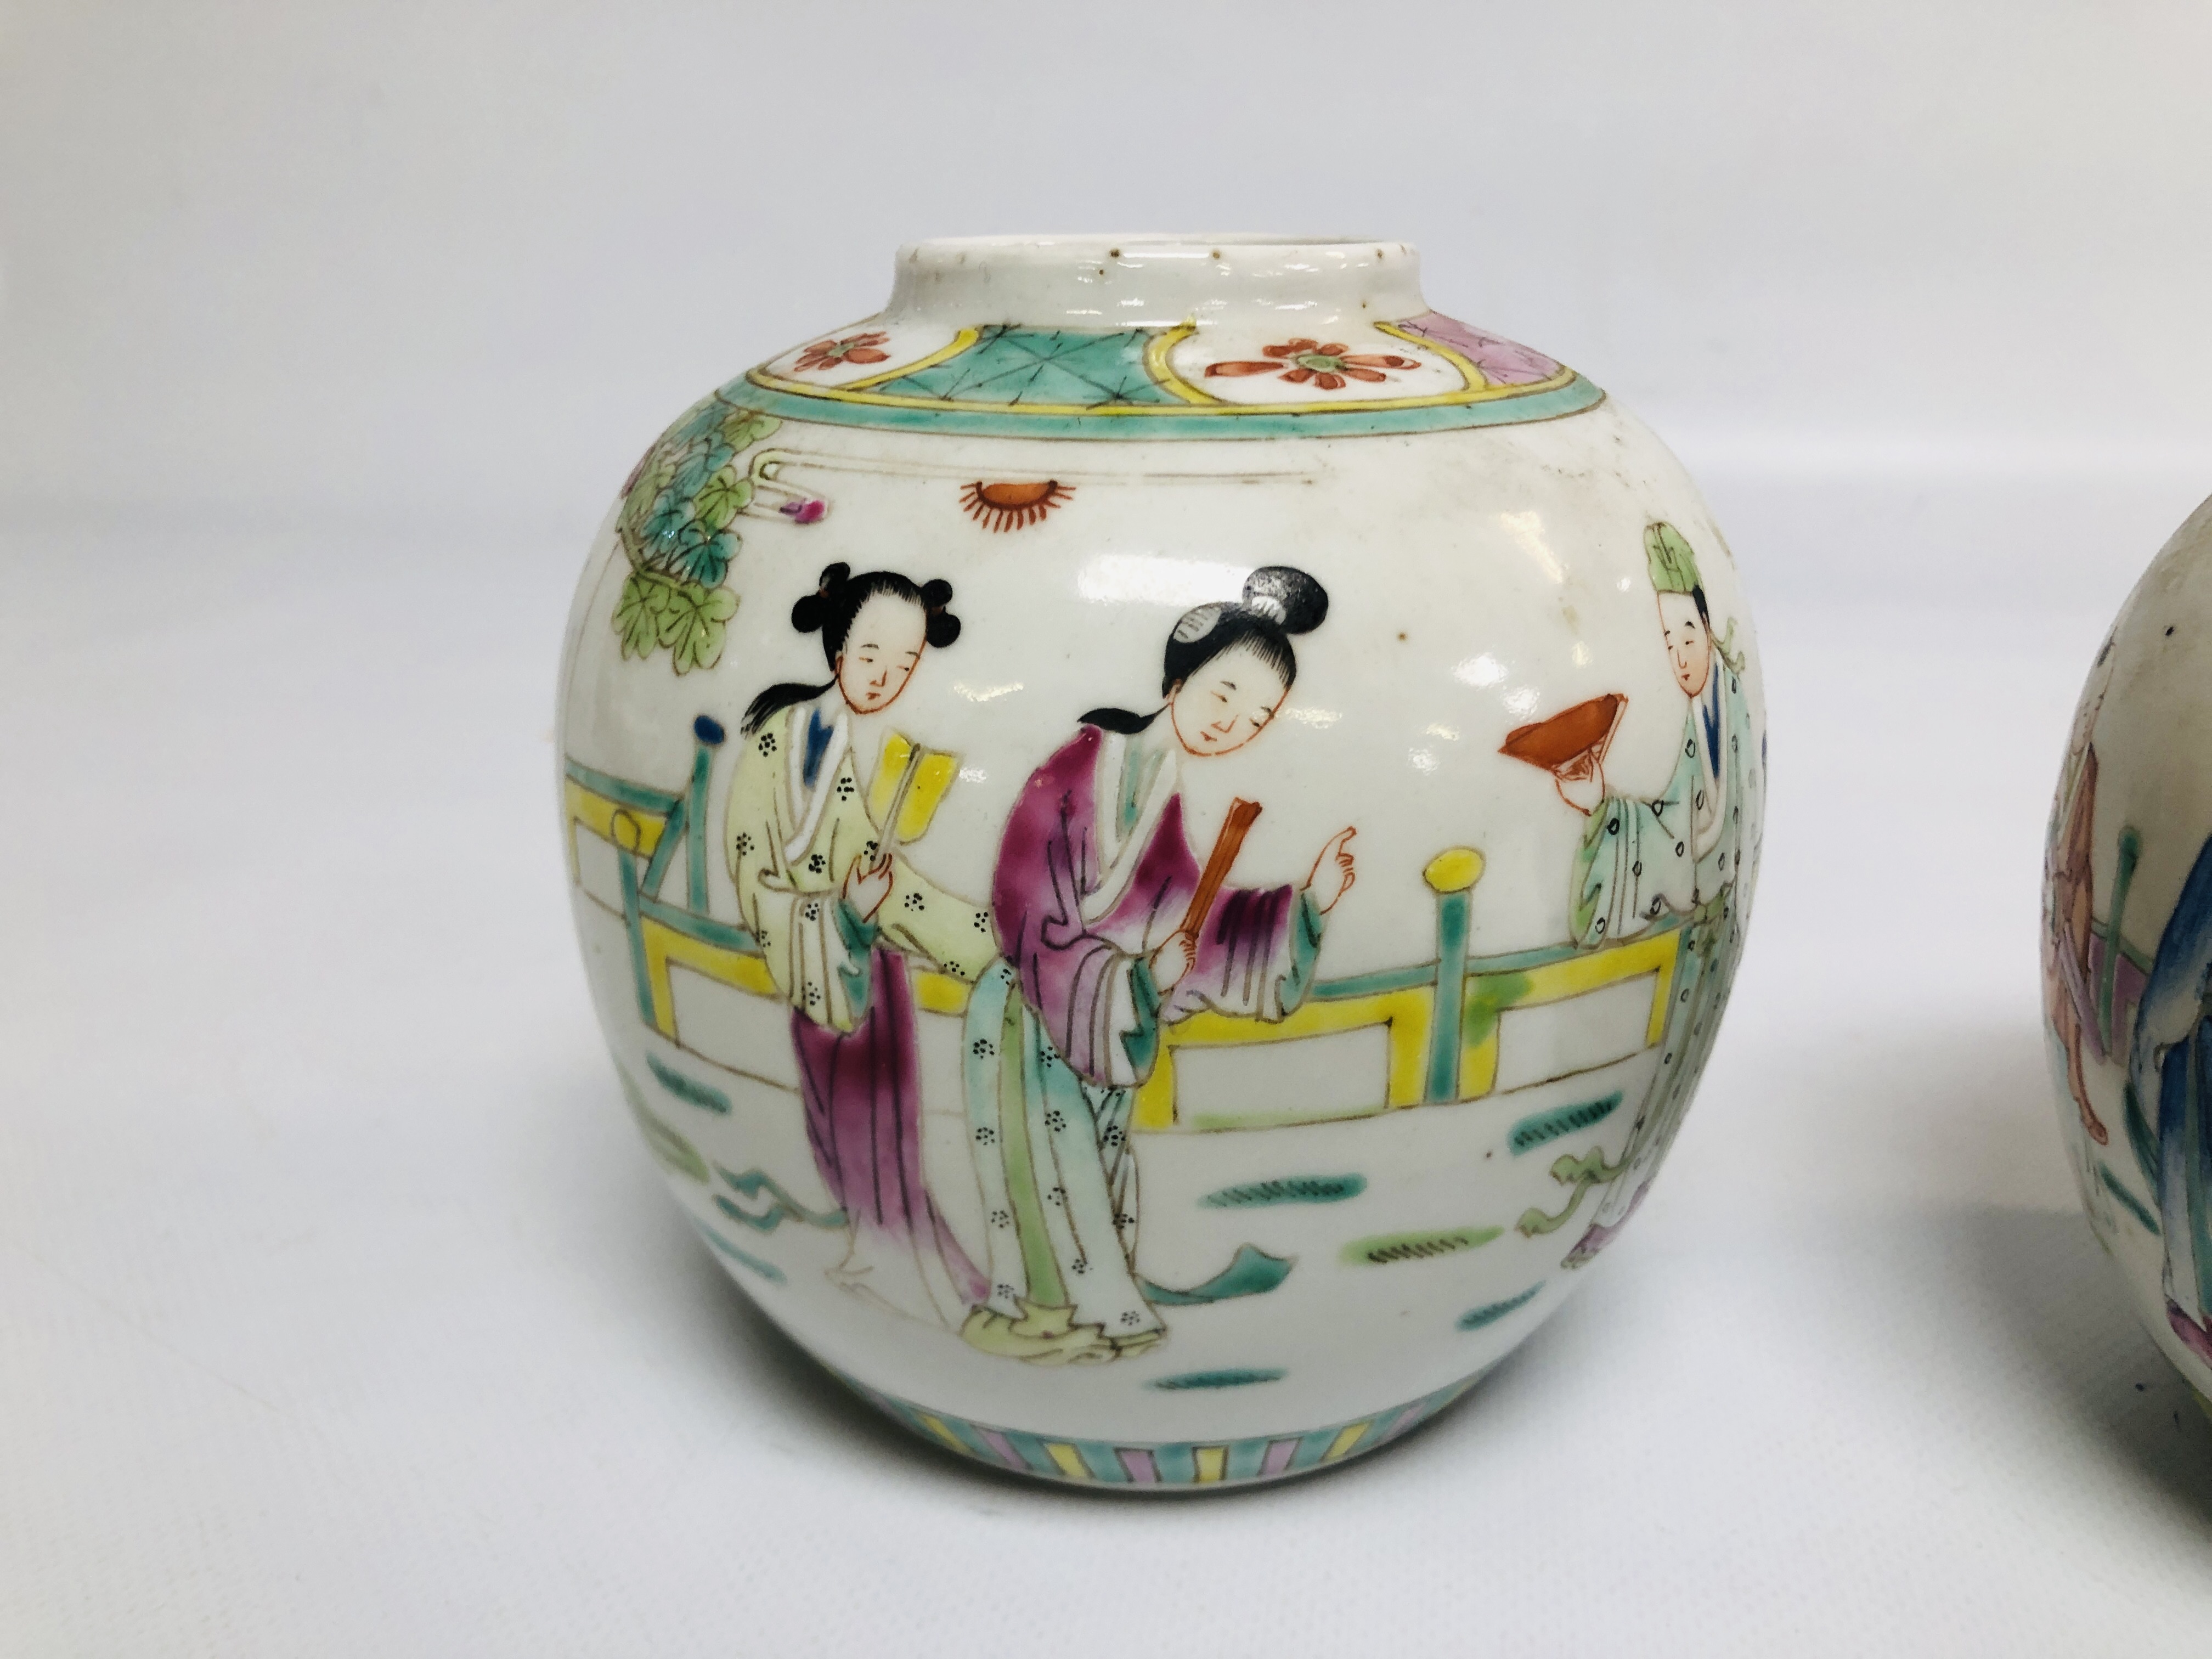 A PAIR OF C19th CHINESE POLYCHROME GINGER JARS, HEIGHT 12.5CM. - Image 2 of 7